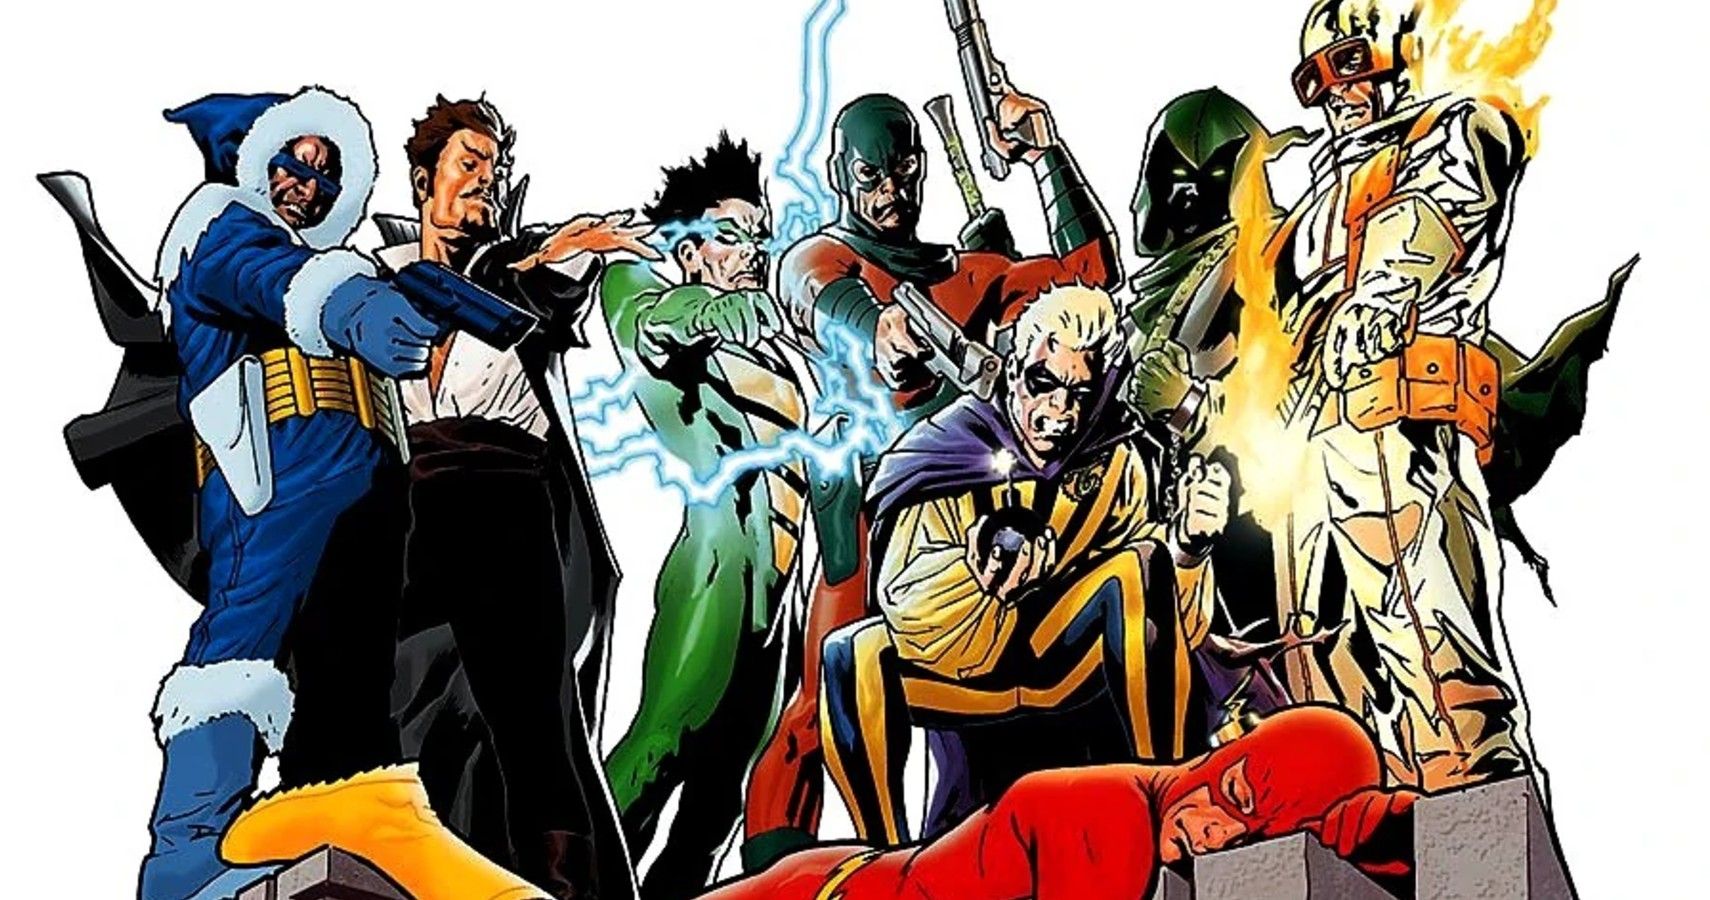 DC Histories: The Rogues